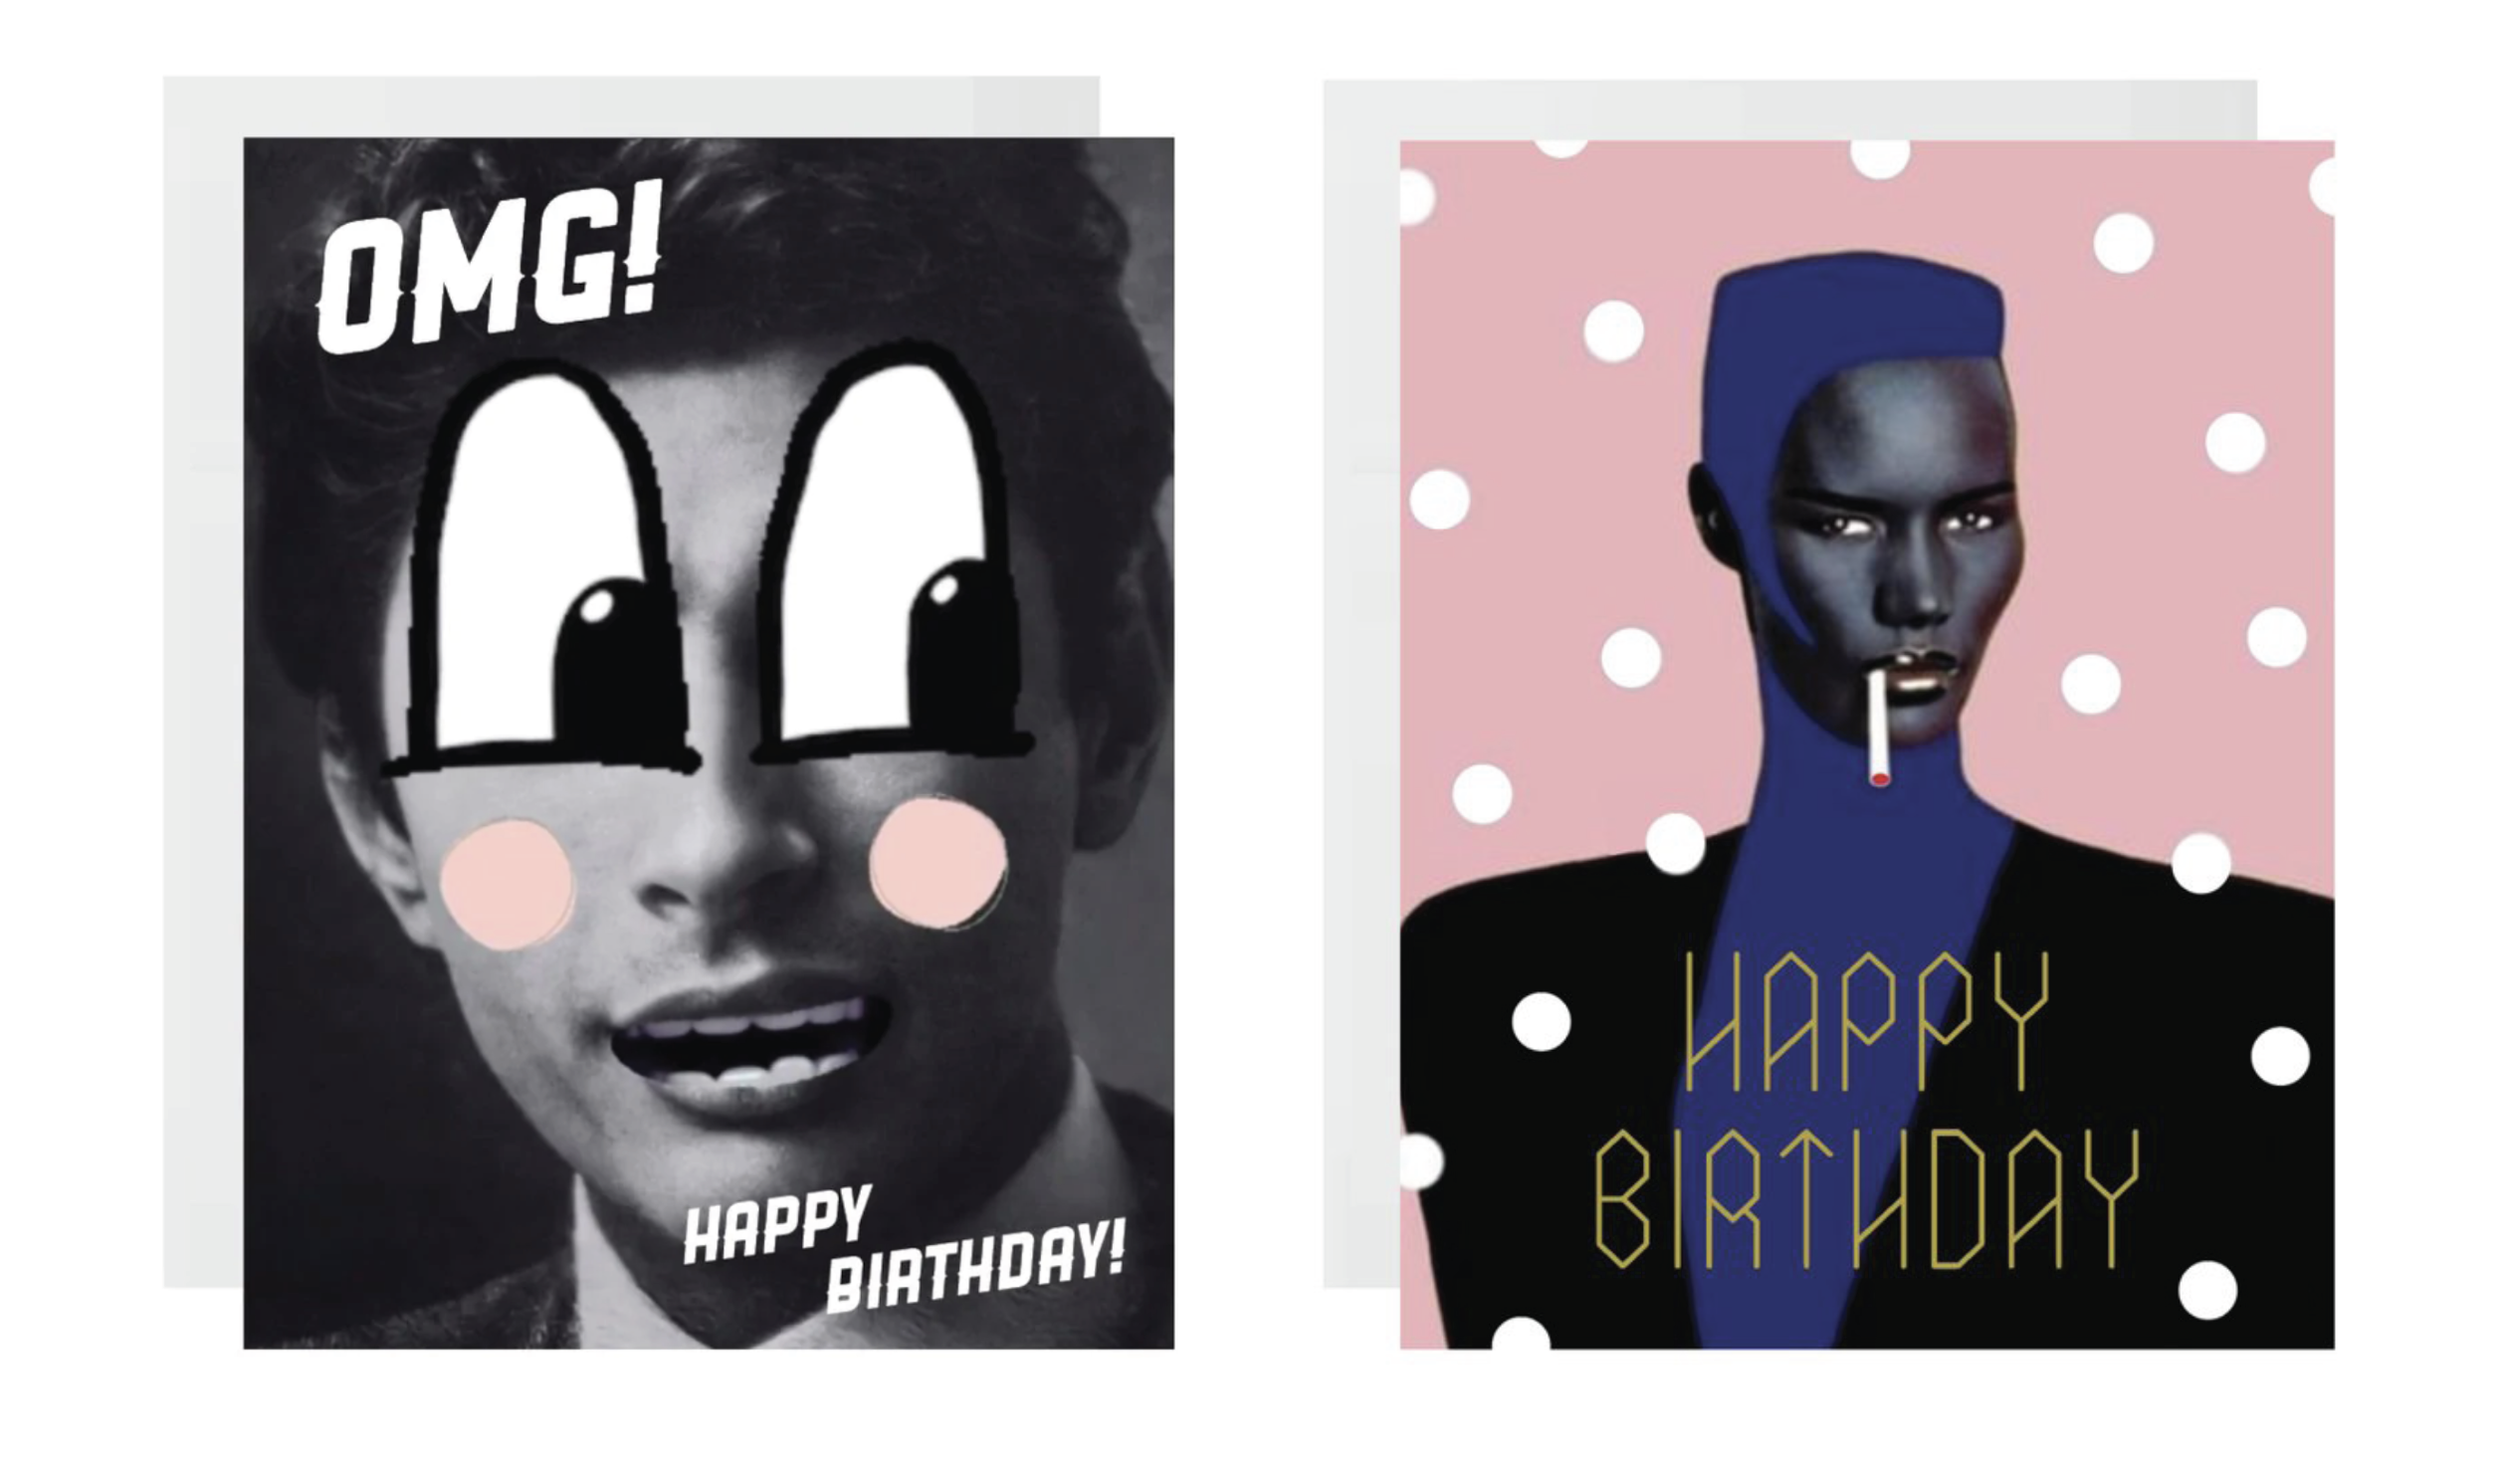  Carla Cards Pop Art Greeting Cards made in the Hudson Valley 